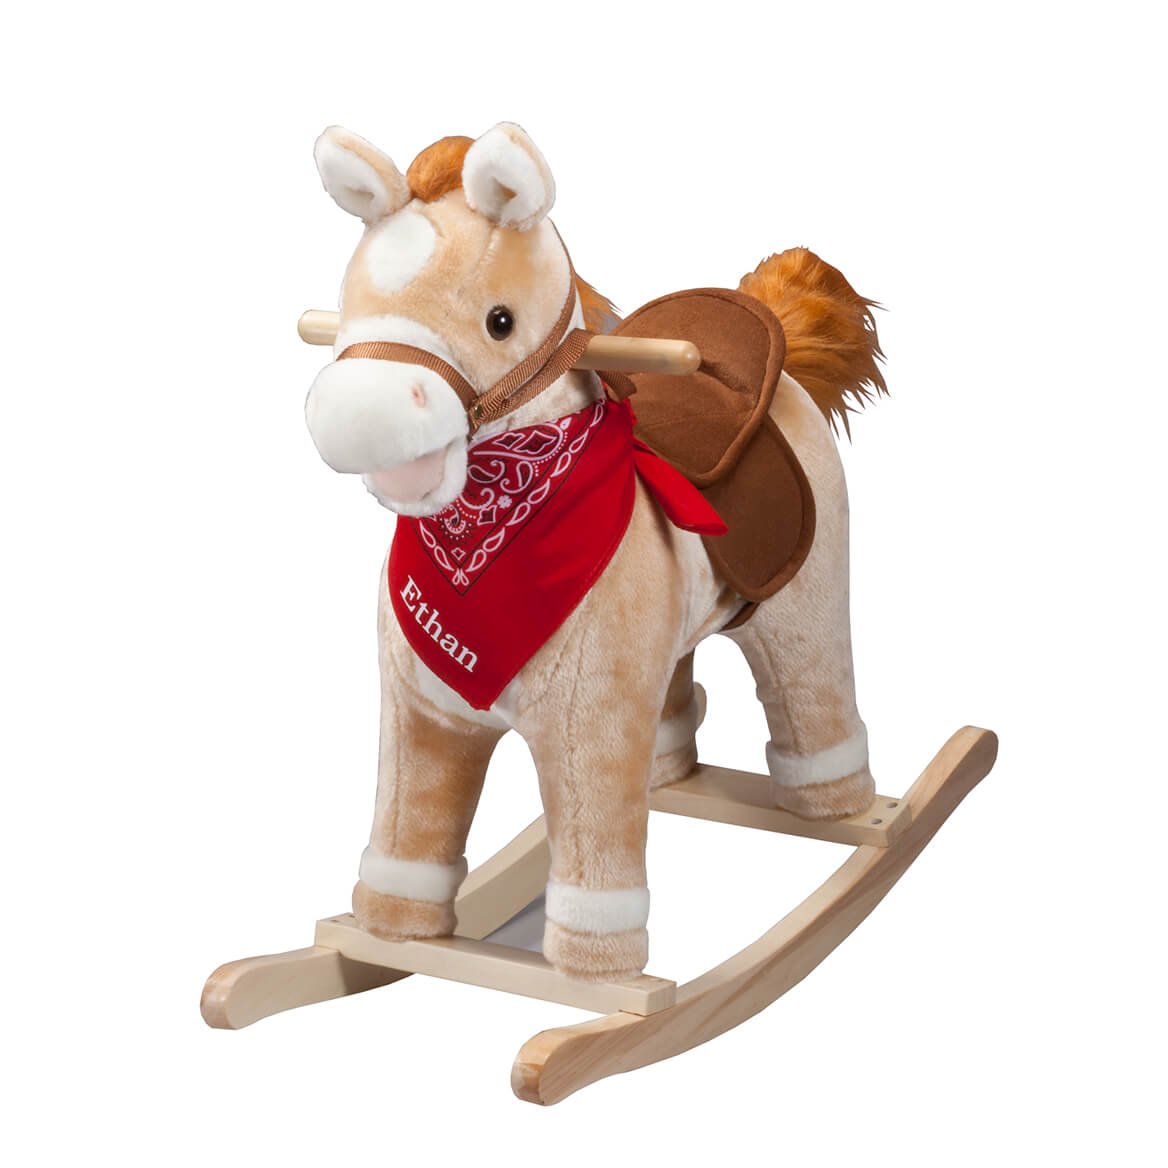 Fox Valley Traders Personalized Animated Rocking Horse with Sounds, Customized Ride-On Pony with Wooden Base